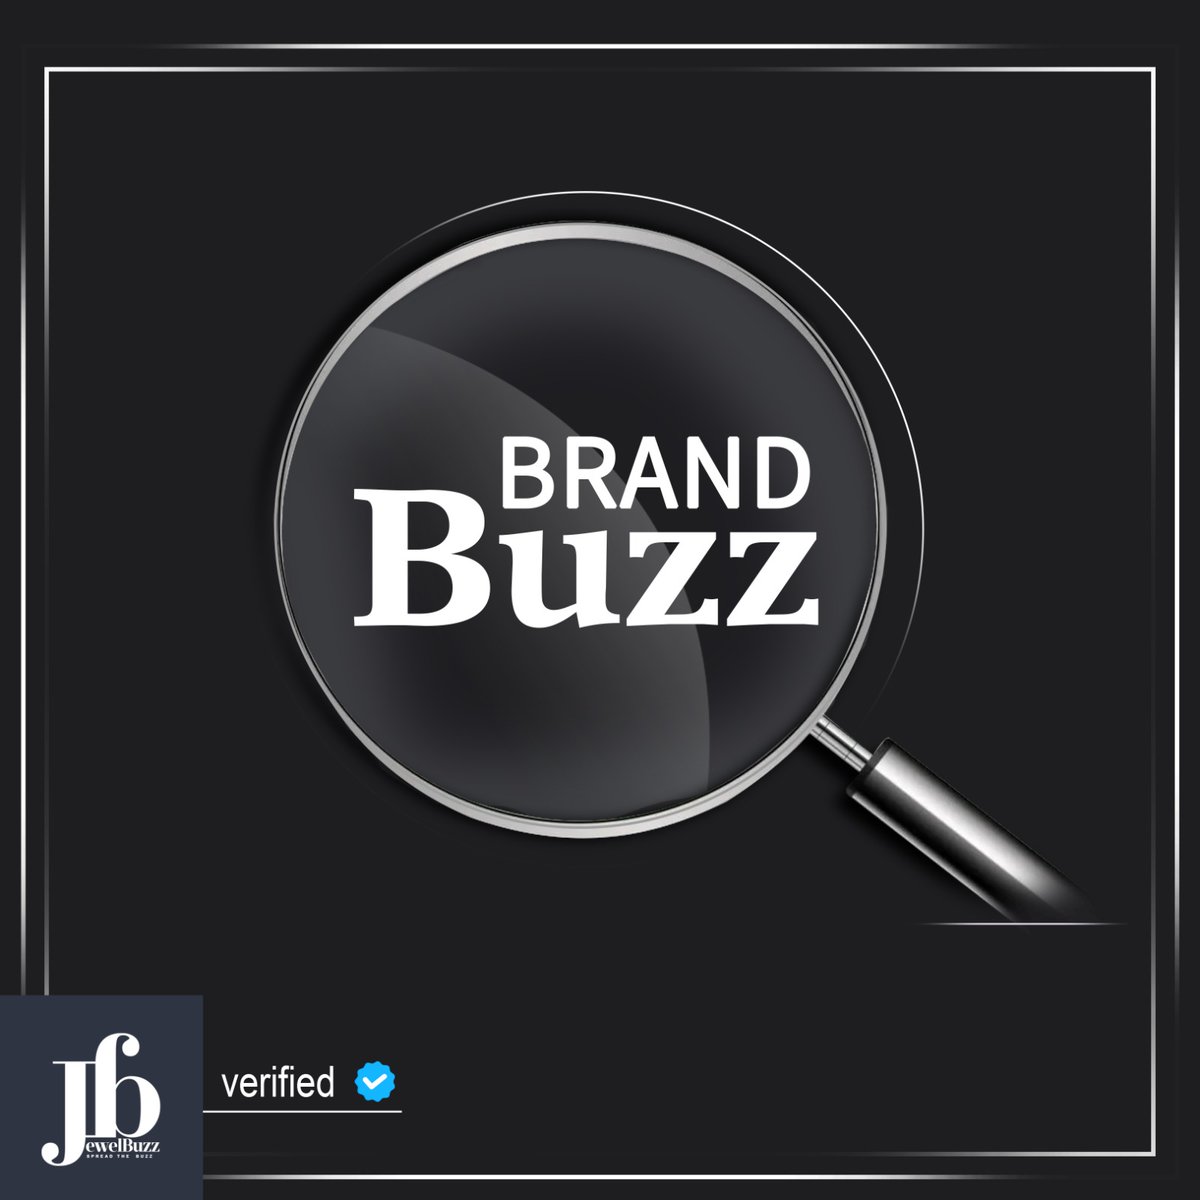 JB-JewelBuzz Verified

BrandBuzz  – creating the right buzz to boost your brand!

'Stories of Culture Whispered in silver Whispers' With Purple Jewels Pvt. Ltd.

Bengaluru - 9844175954
Chennai - 9841110697
Mumbai - 9920274644
Hyderabad - 9035130300

purplejewels.in

For